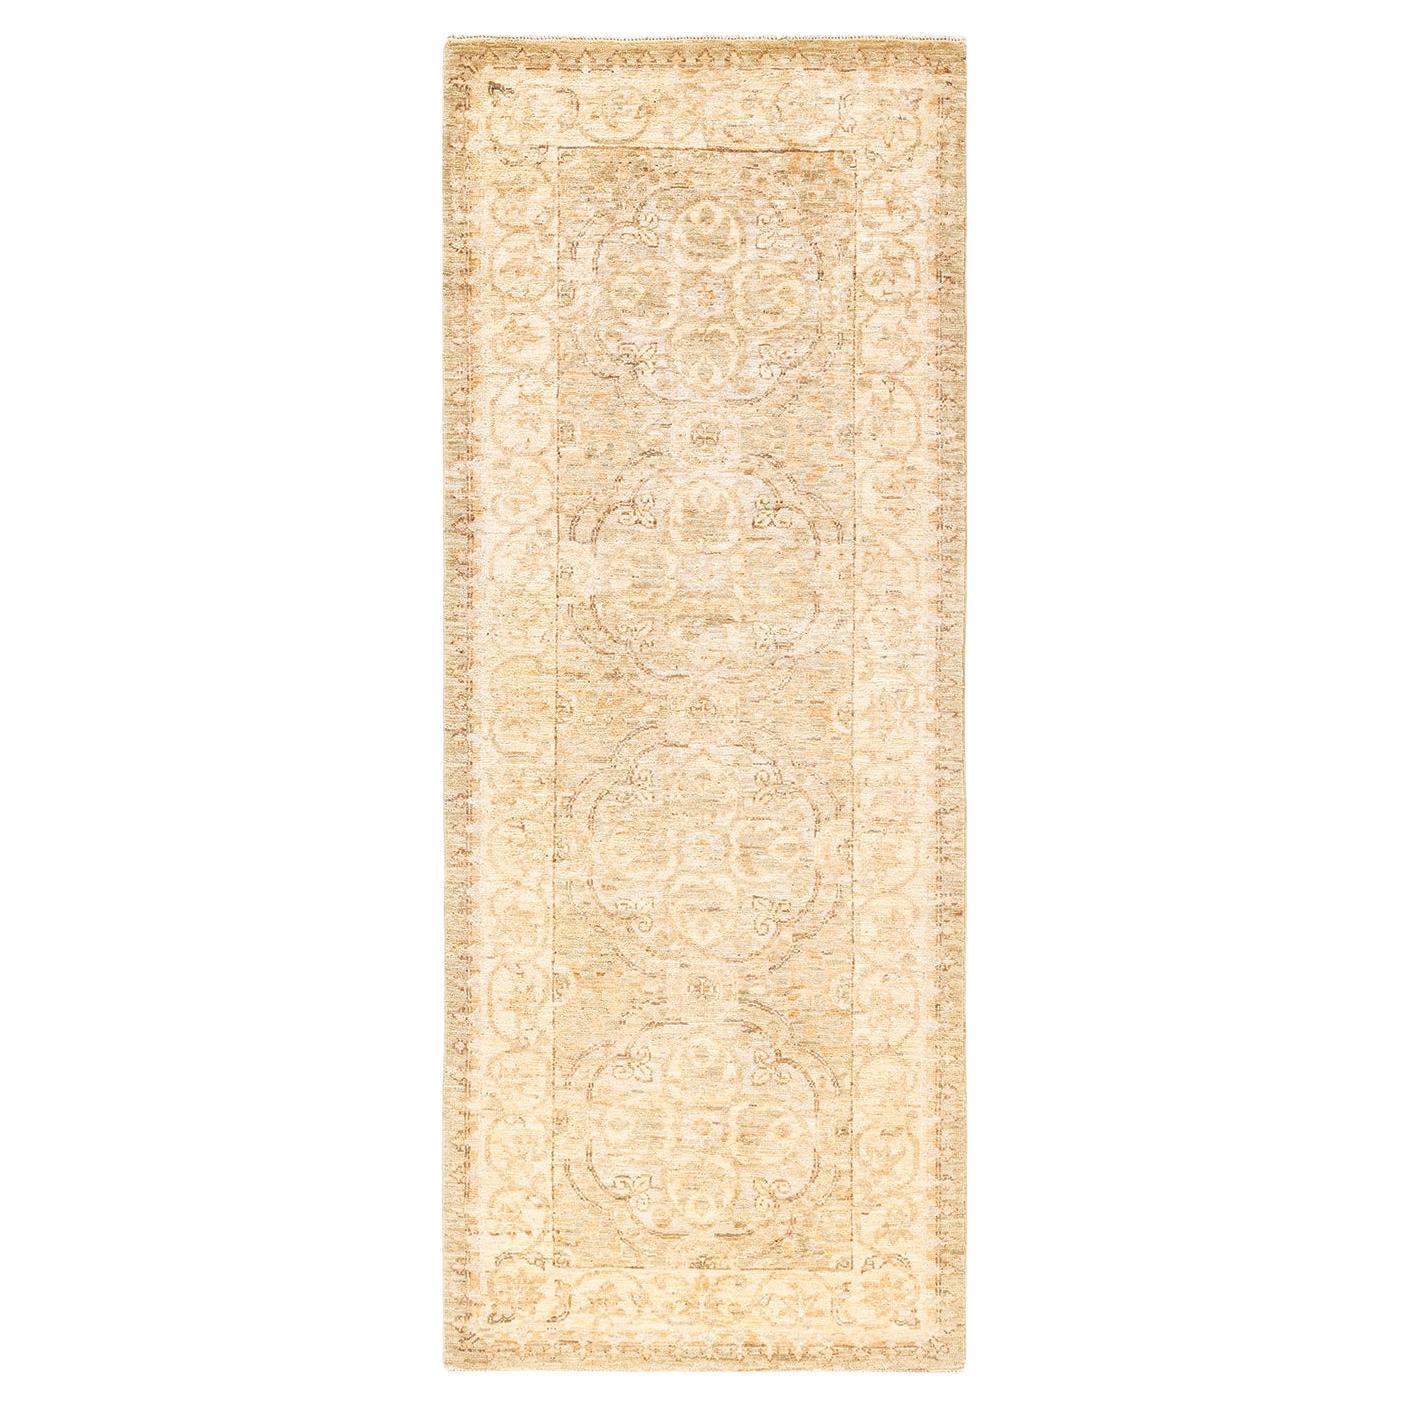 One-of-a-kind Hand Knotted Oriental Eclectic Ivory Area Rug